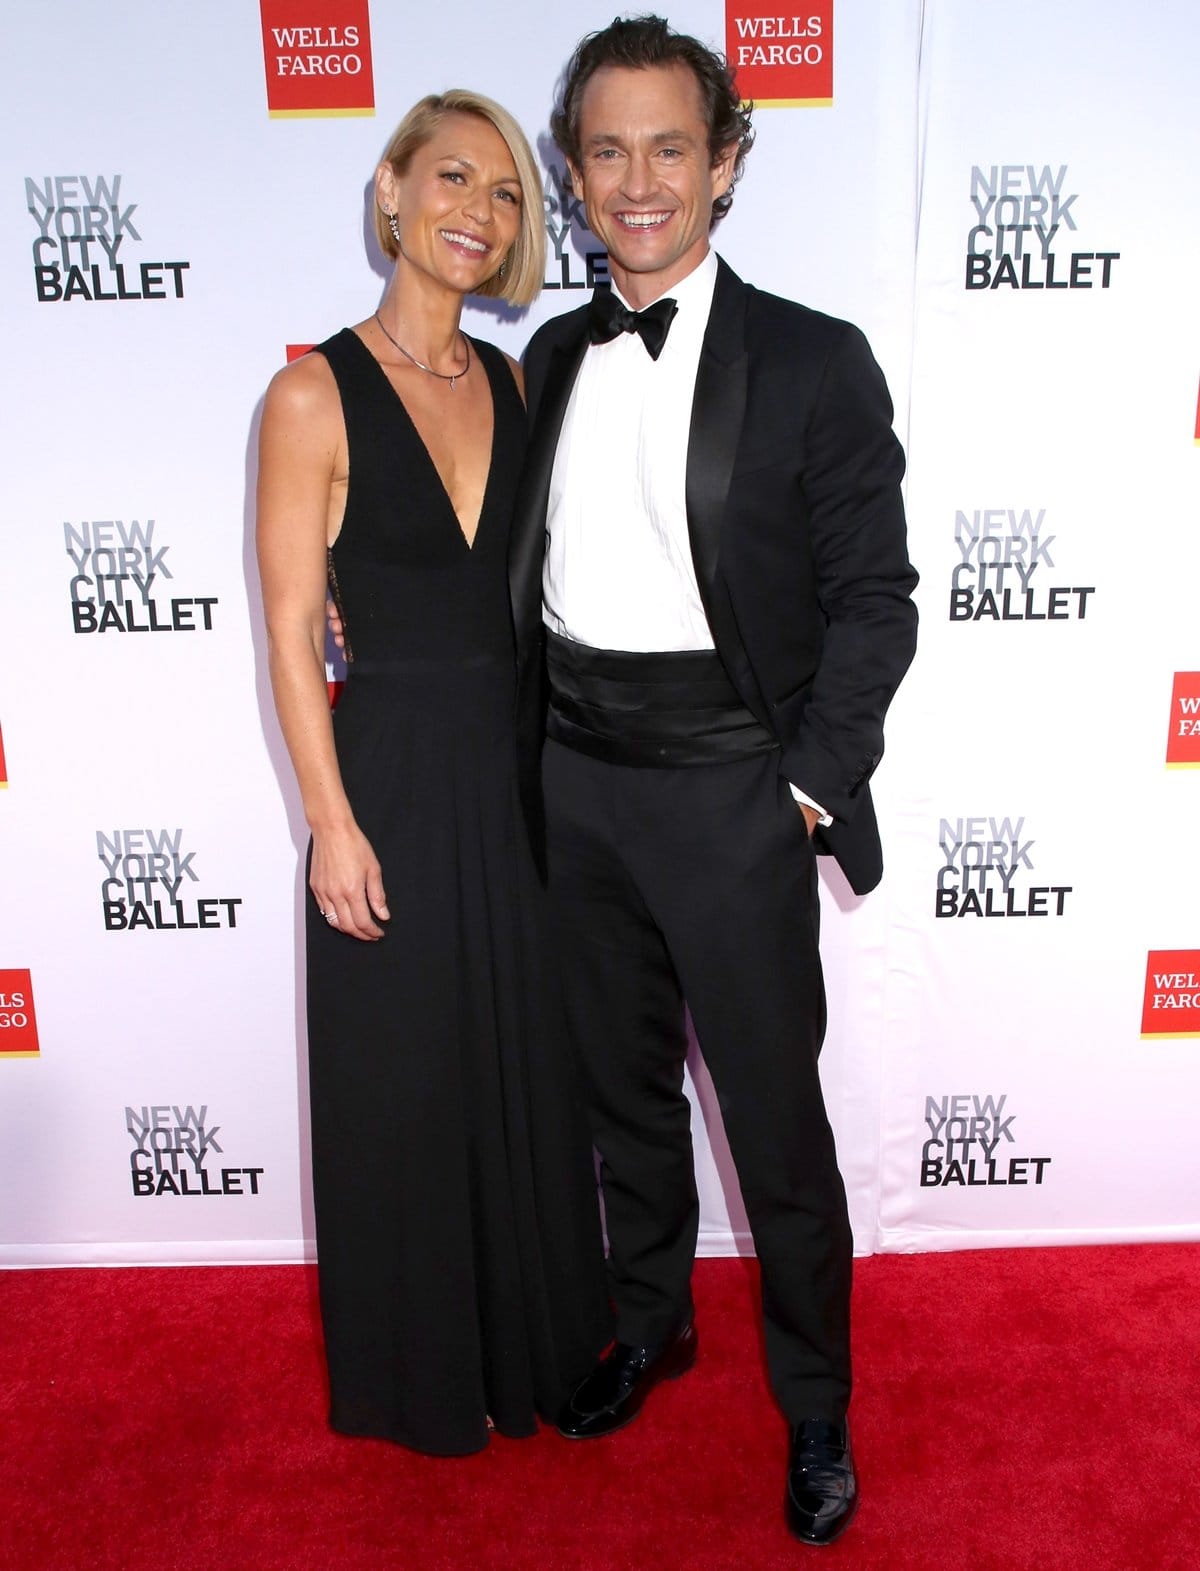 Claire Danes in a Narciso Rodriguez dress and her husband Hugh Dancy attend the 2021 New York City Ballet Fall Fashion Gala